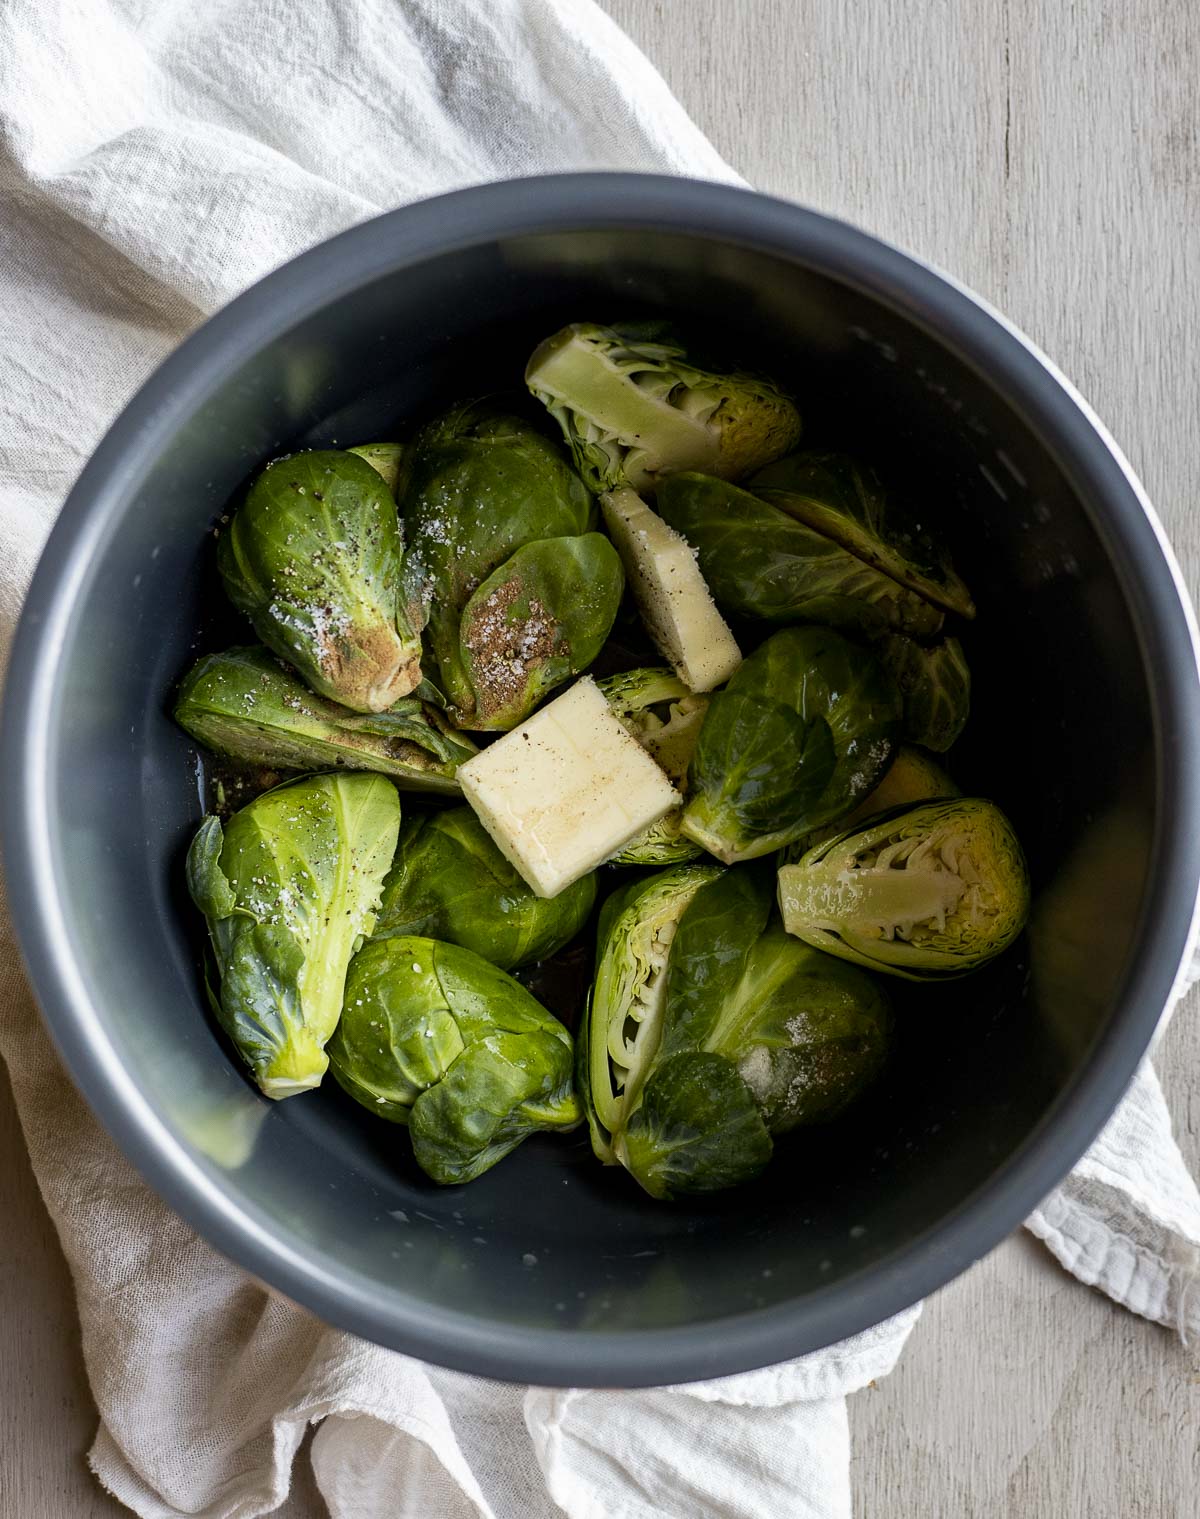 Raw brussels sprouts and other ingredients placed in the Instant Pot insert.